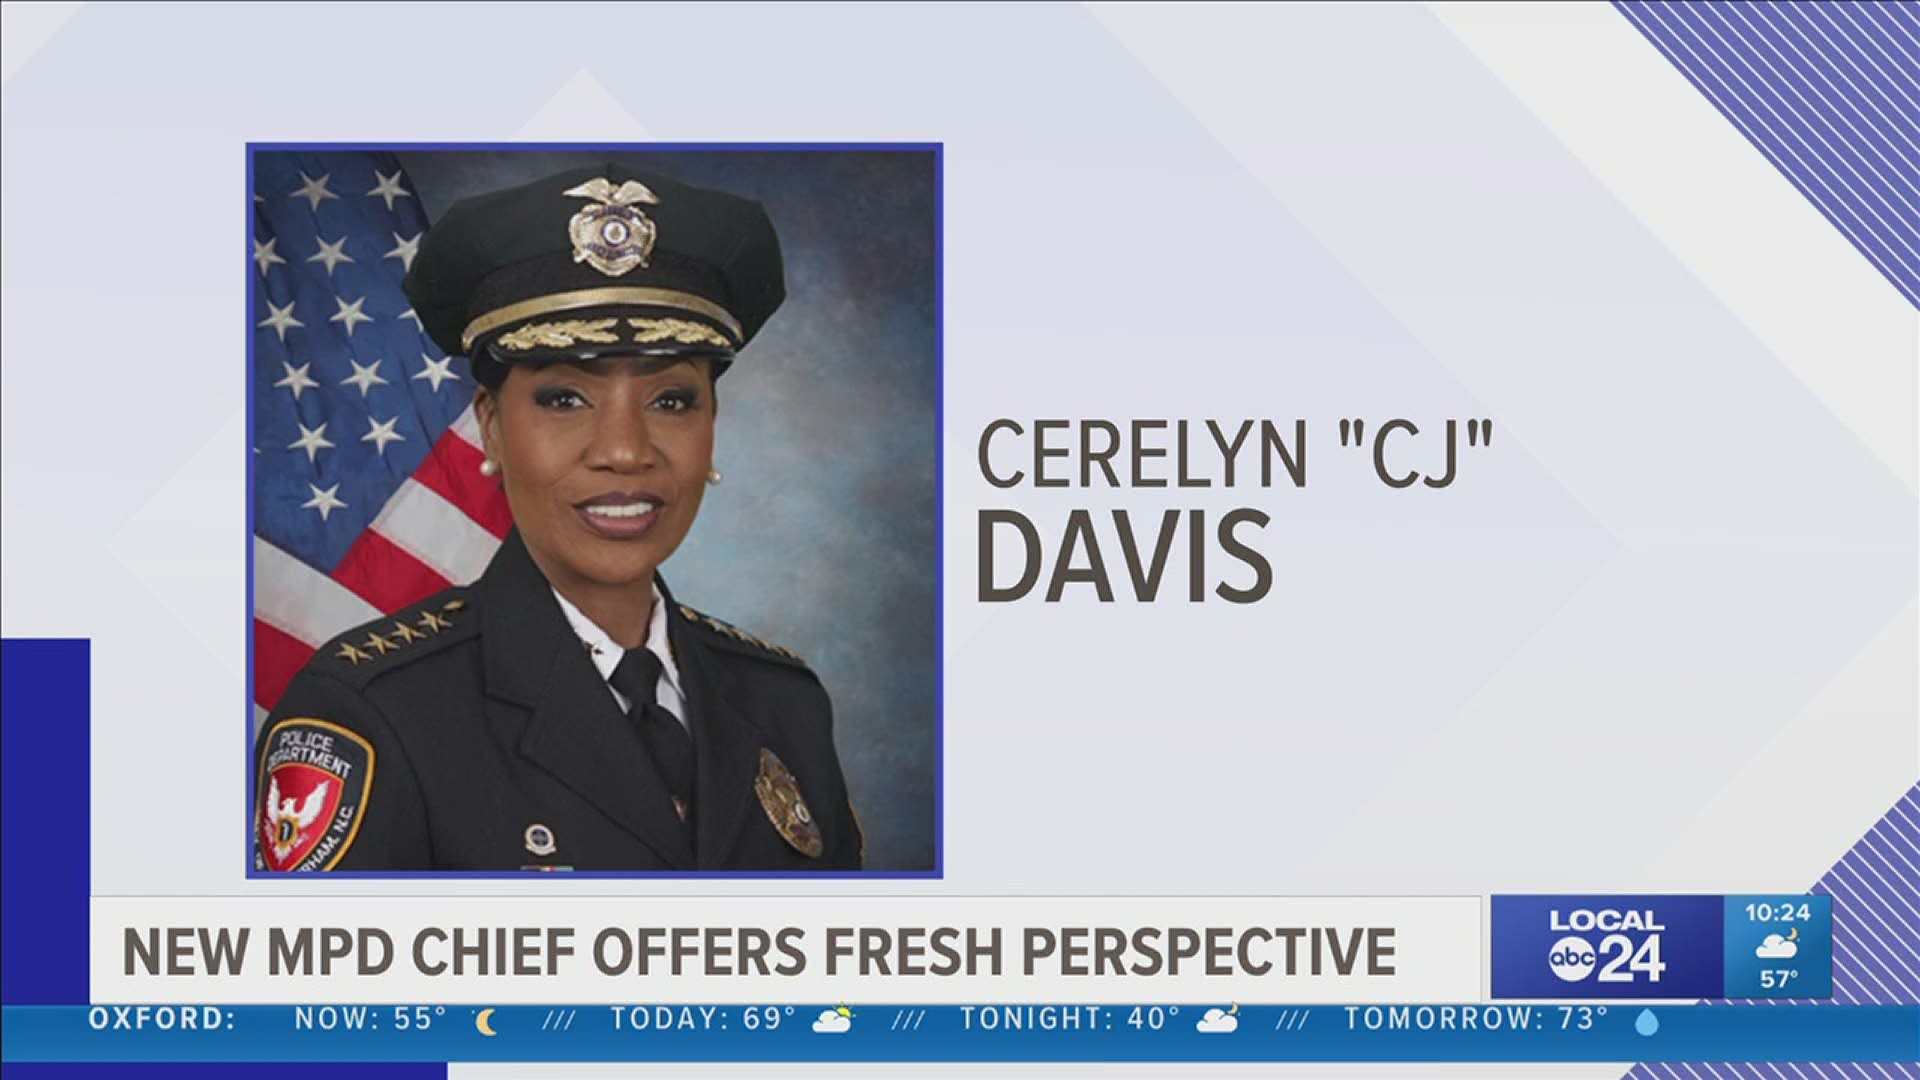 Cerelyn “CJ” Davis picked by Mayor Strickland to be new director of Memphis Police Department.